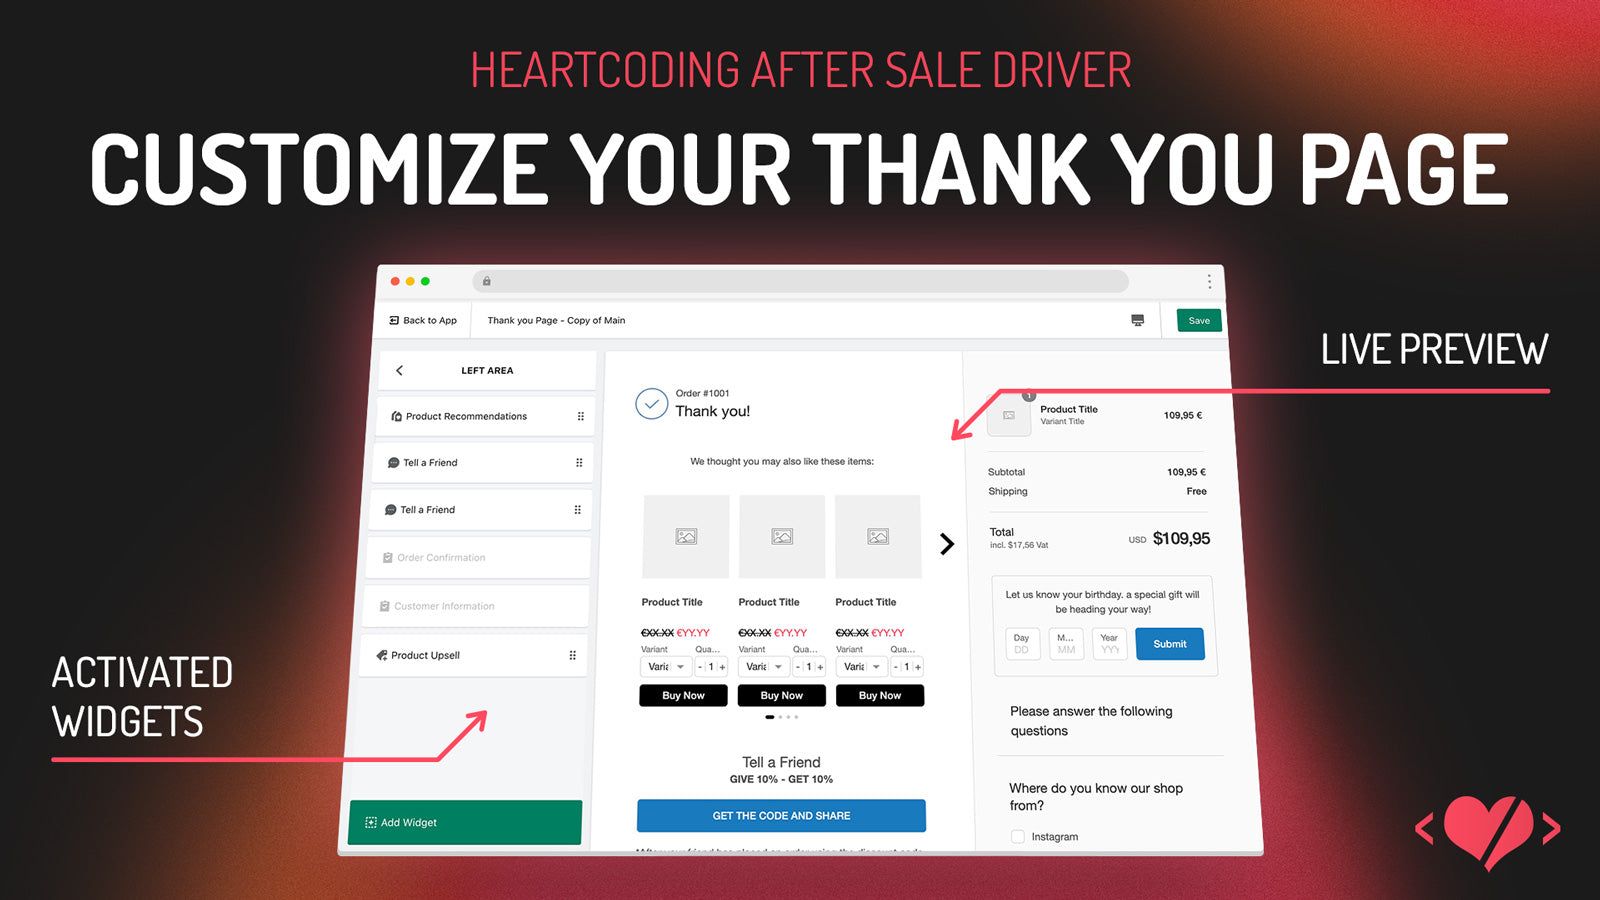 Customize your thank you page with various widgets and discounts